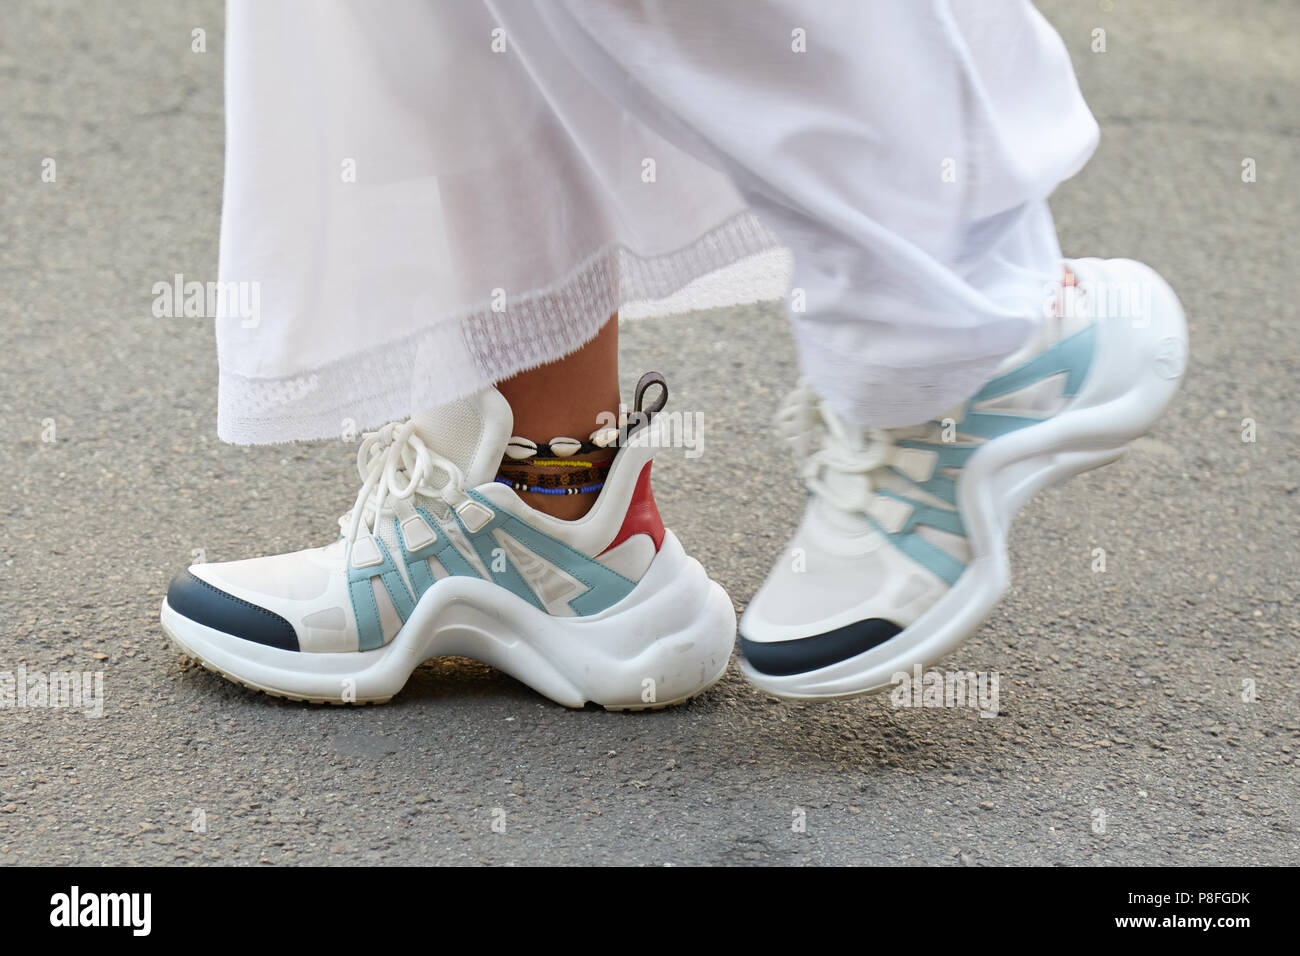 MILAN - JUNE 16: Woman with white and blue Louis Vuitton sneakers